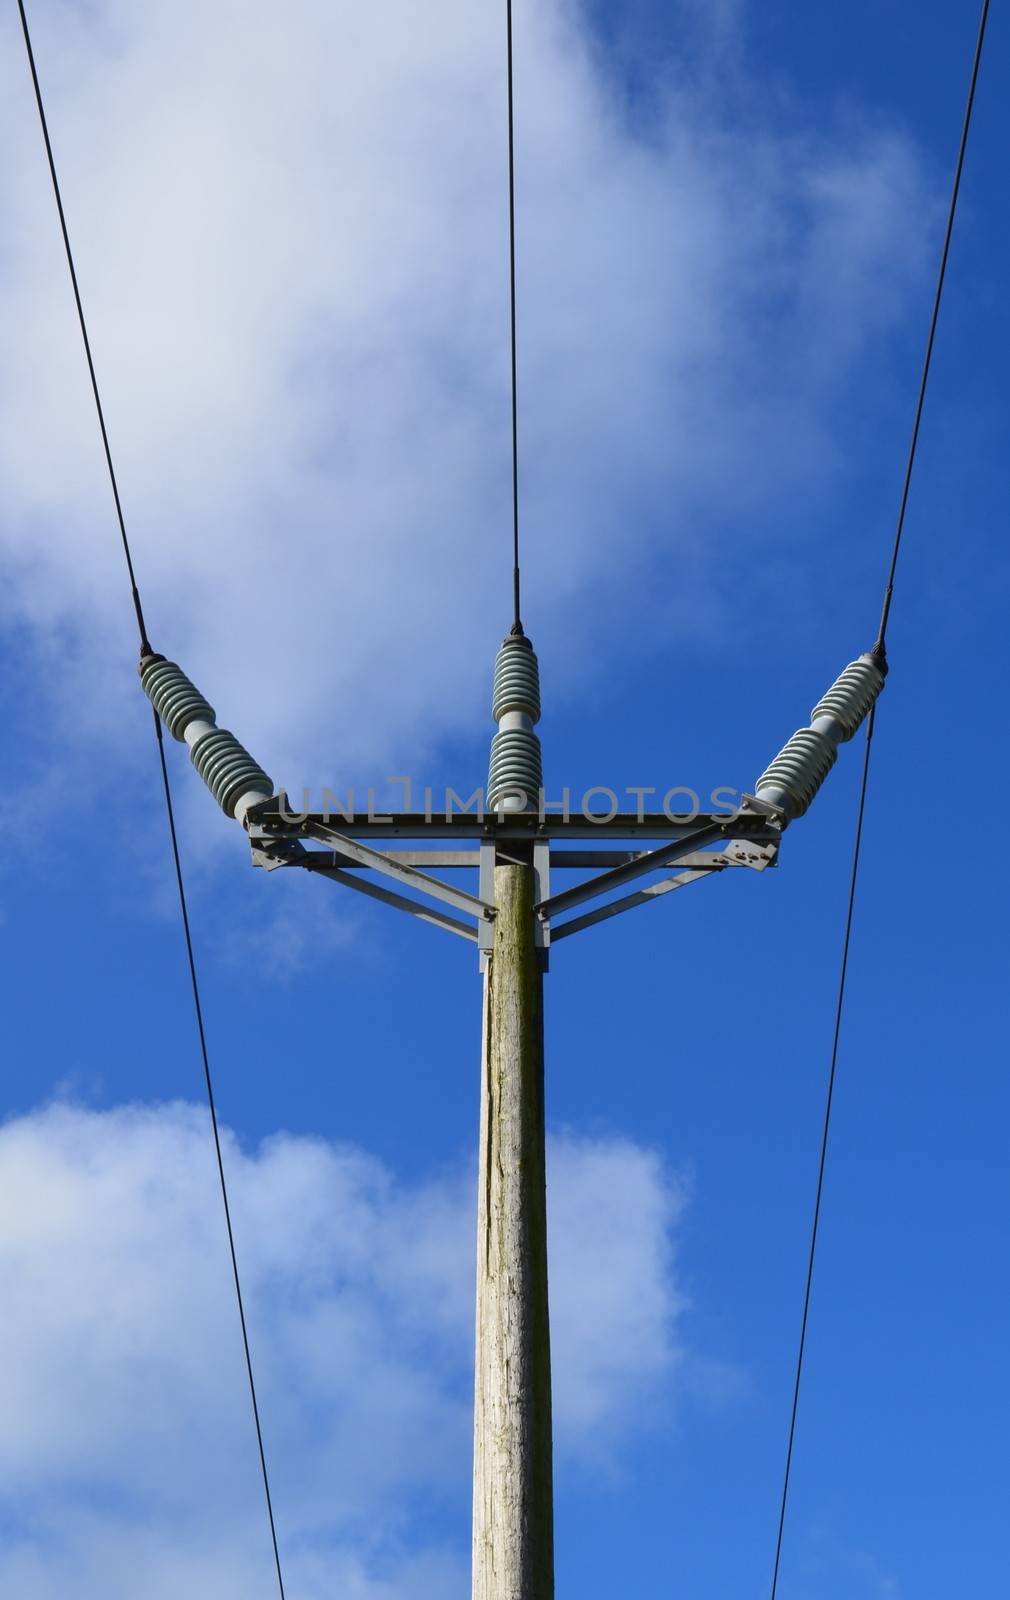 Small rural UK electricity pole.